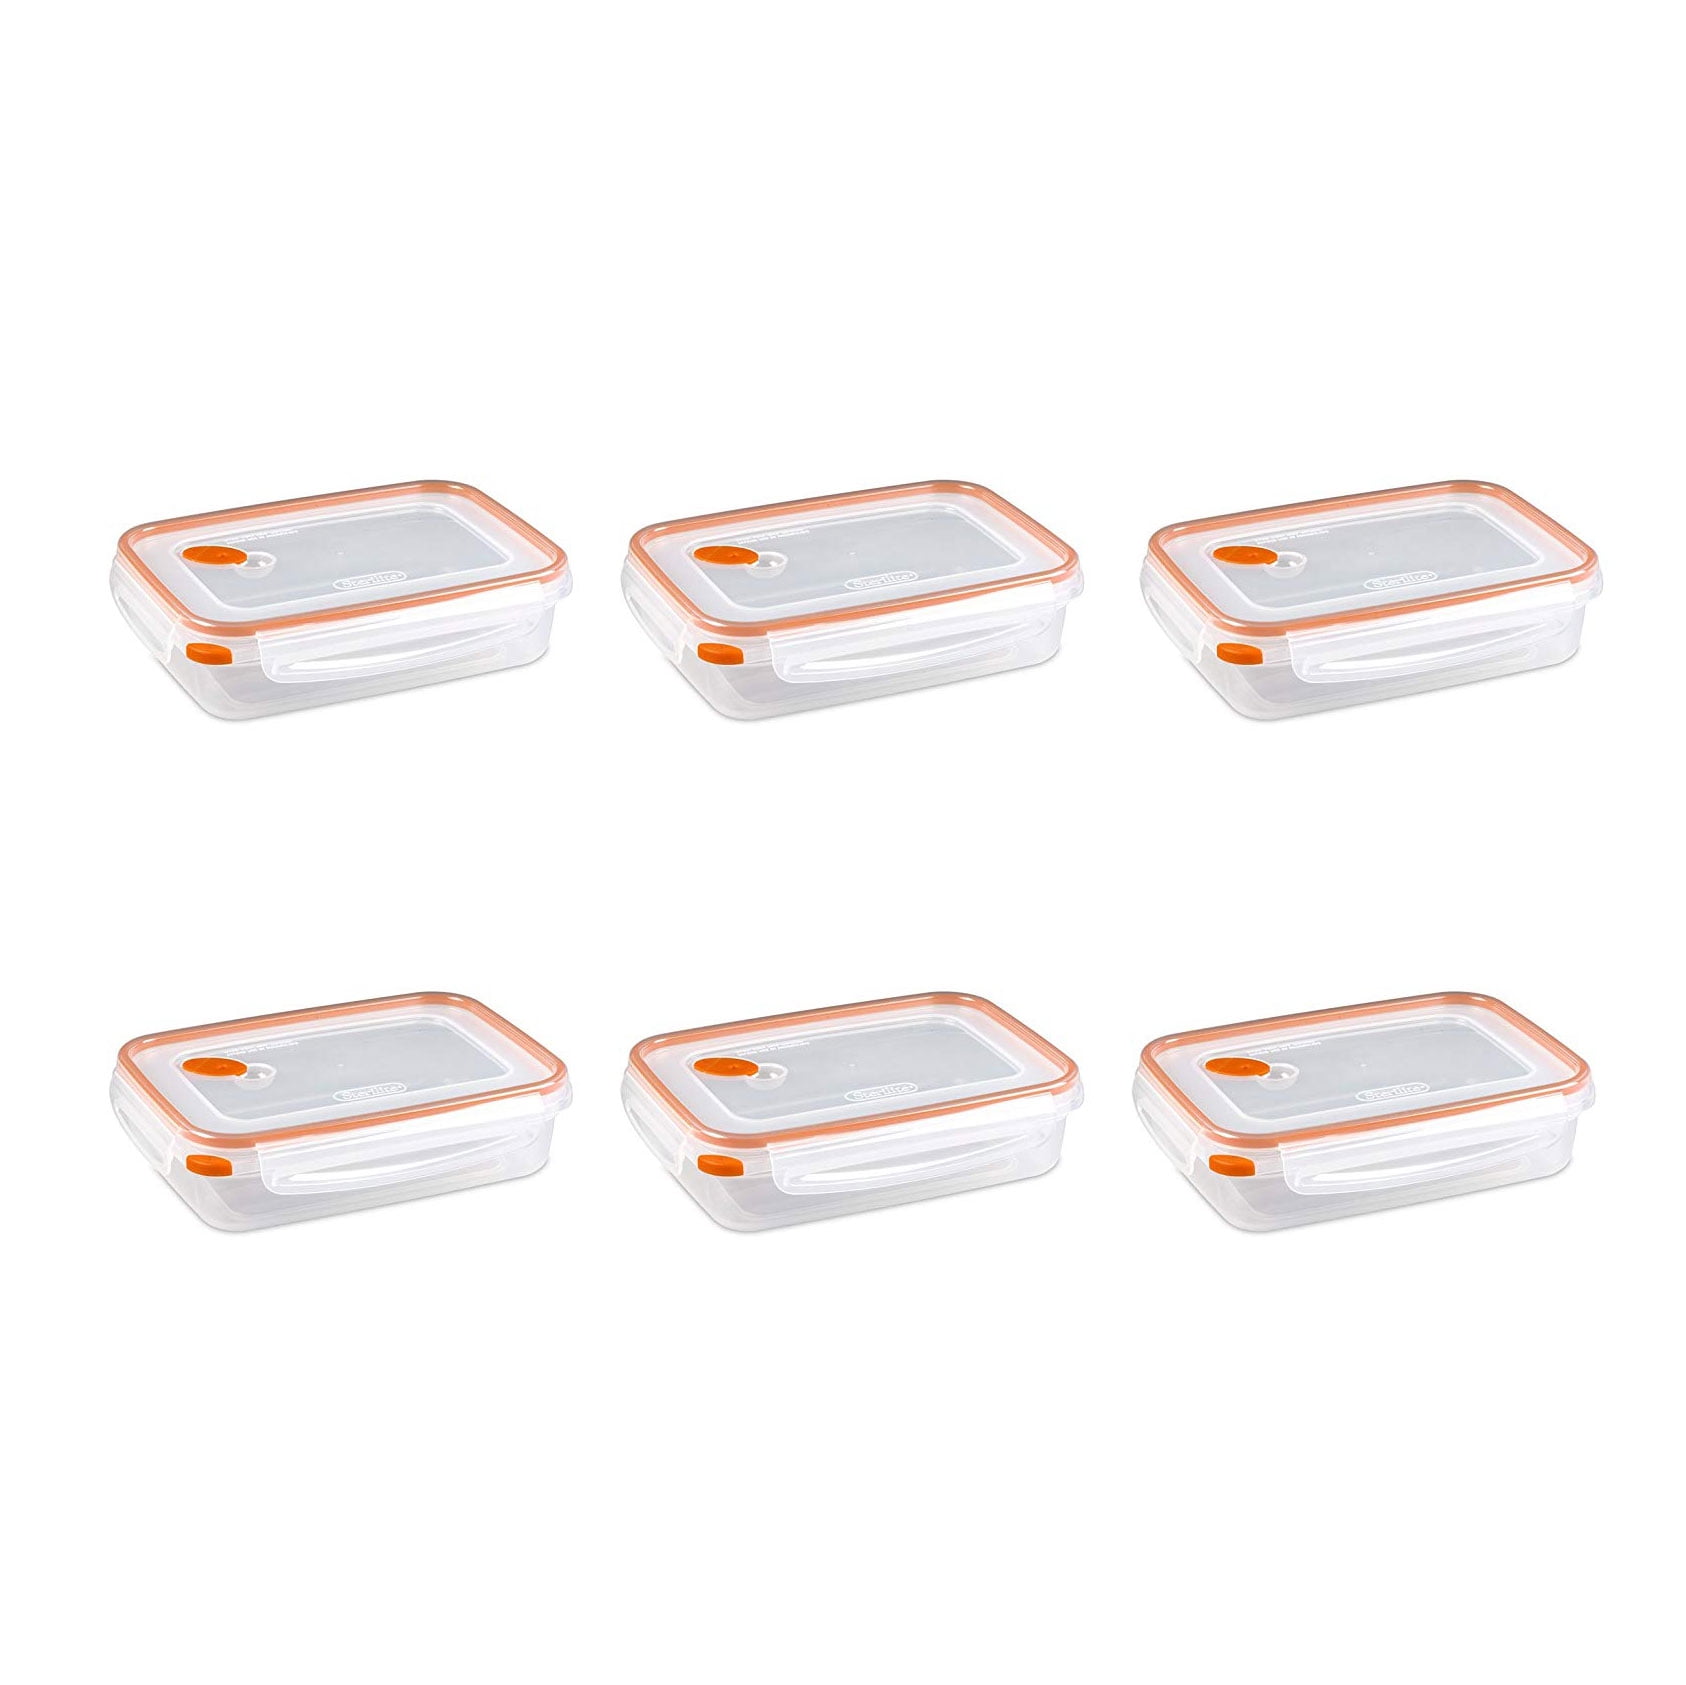 Sterilite Food Storage Container 12 Cups Rectangle Ultraseal Clear 0323, 2-Pack